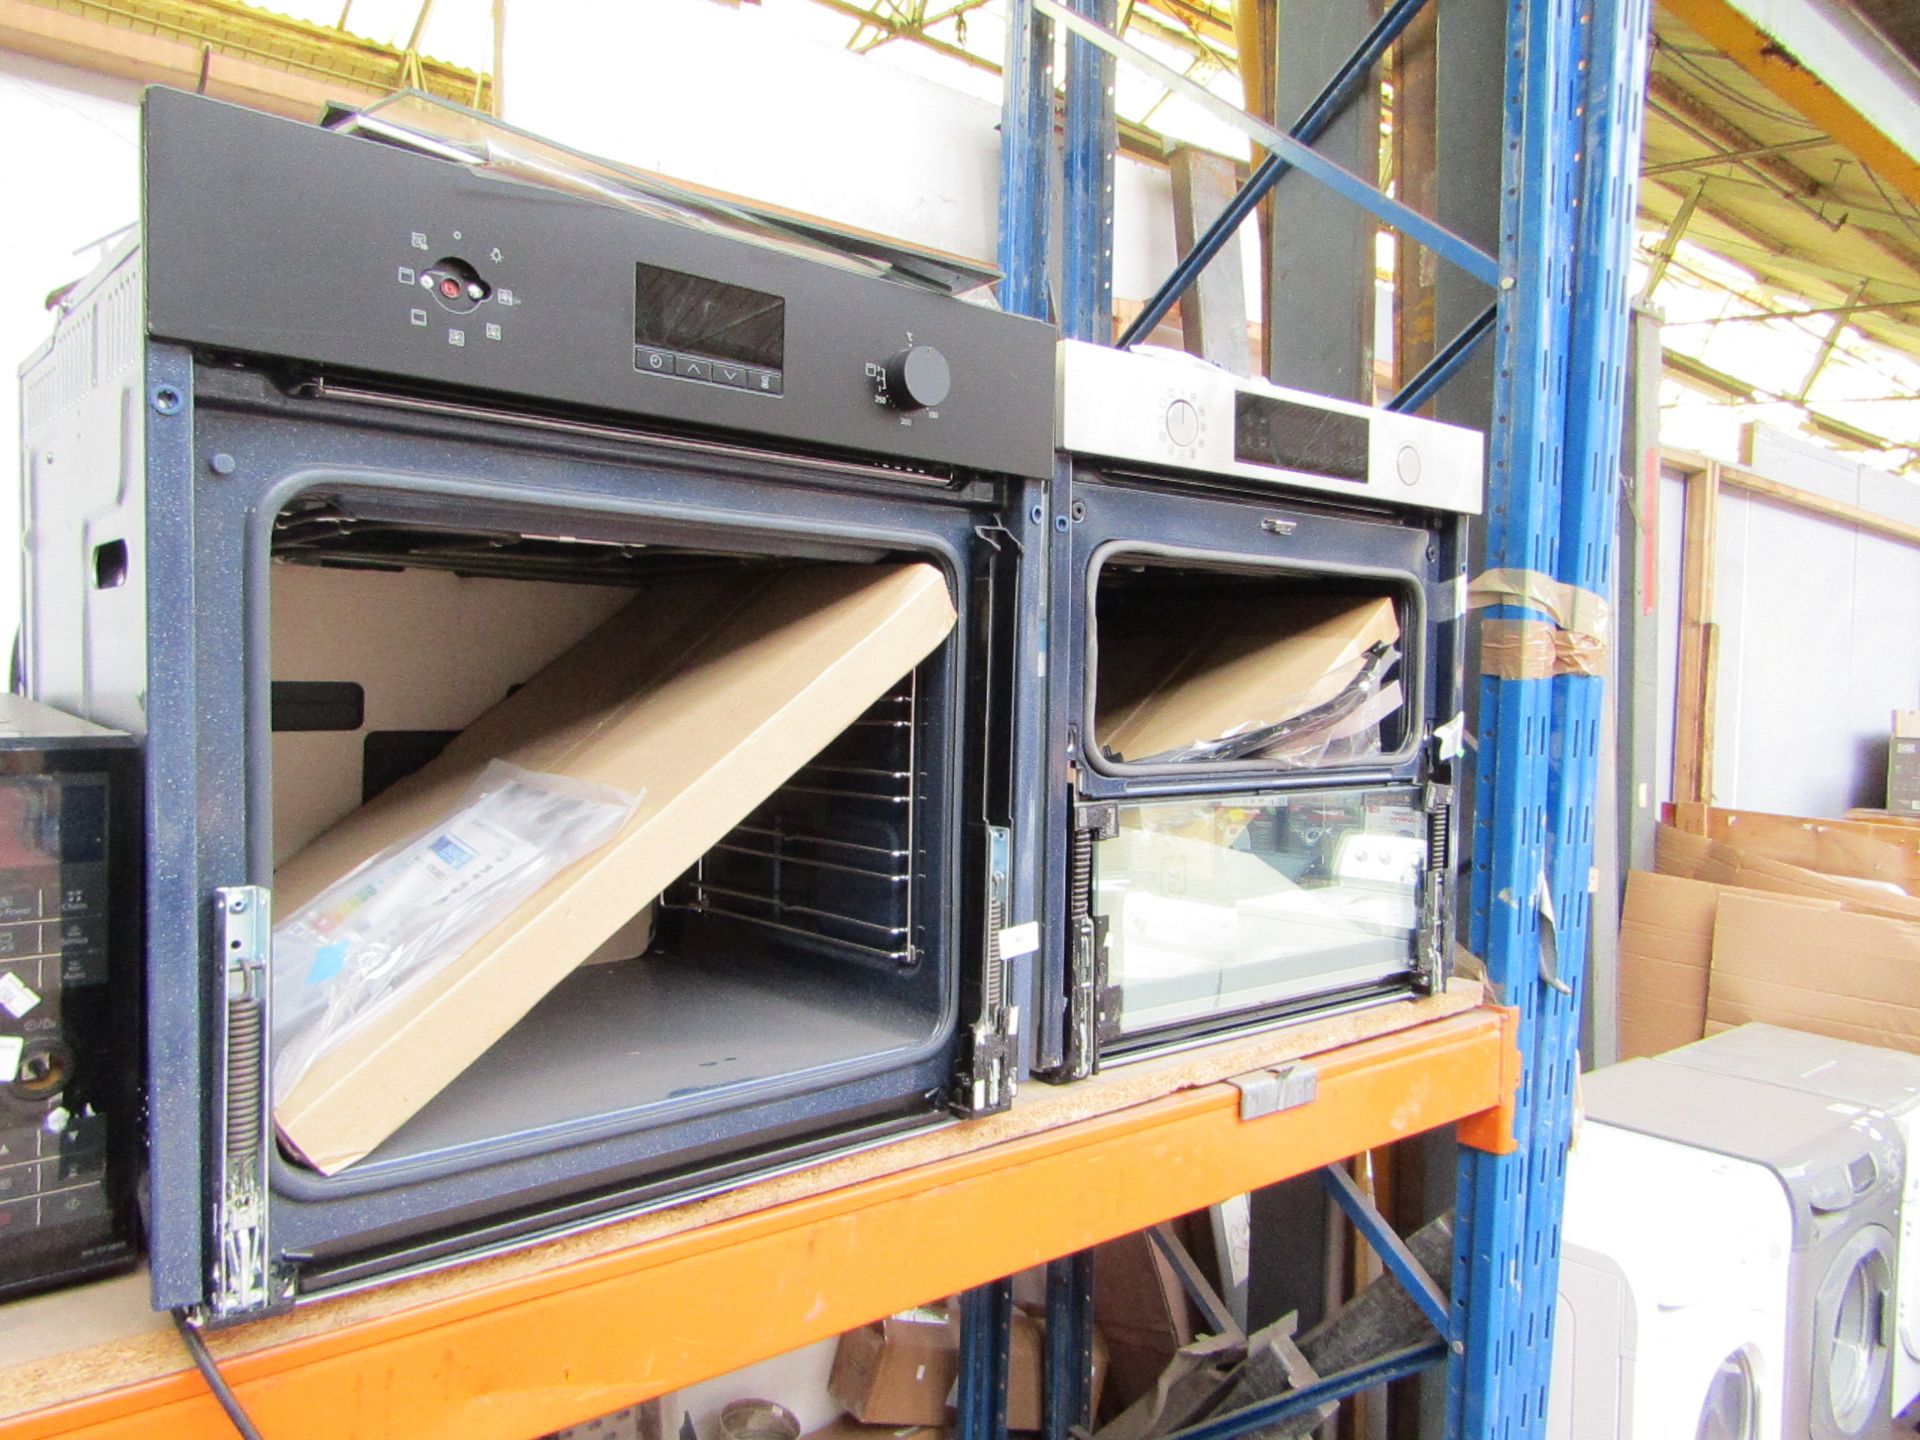 2x Intergrated ovens, both spares and repairs.